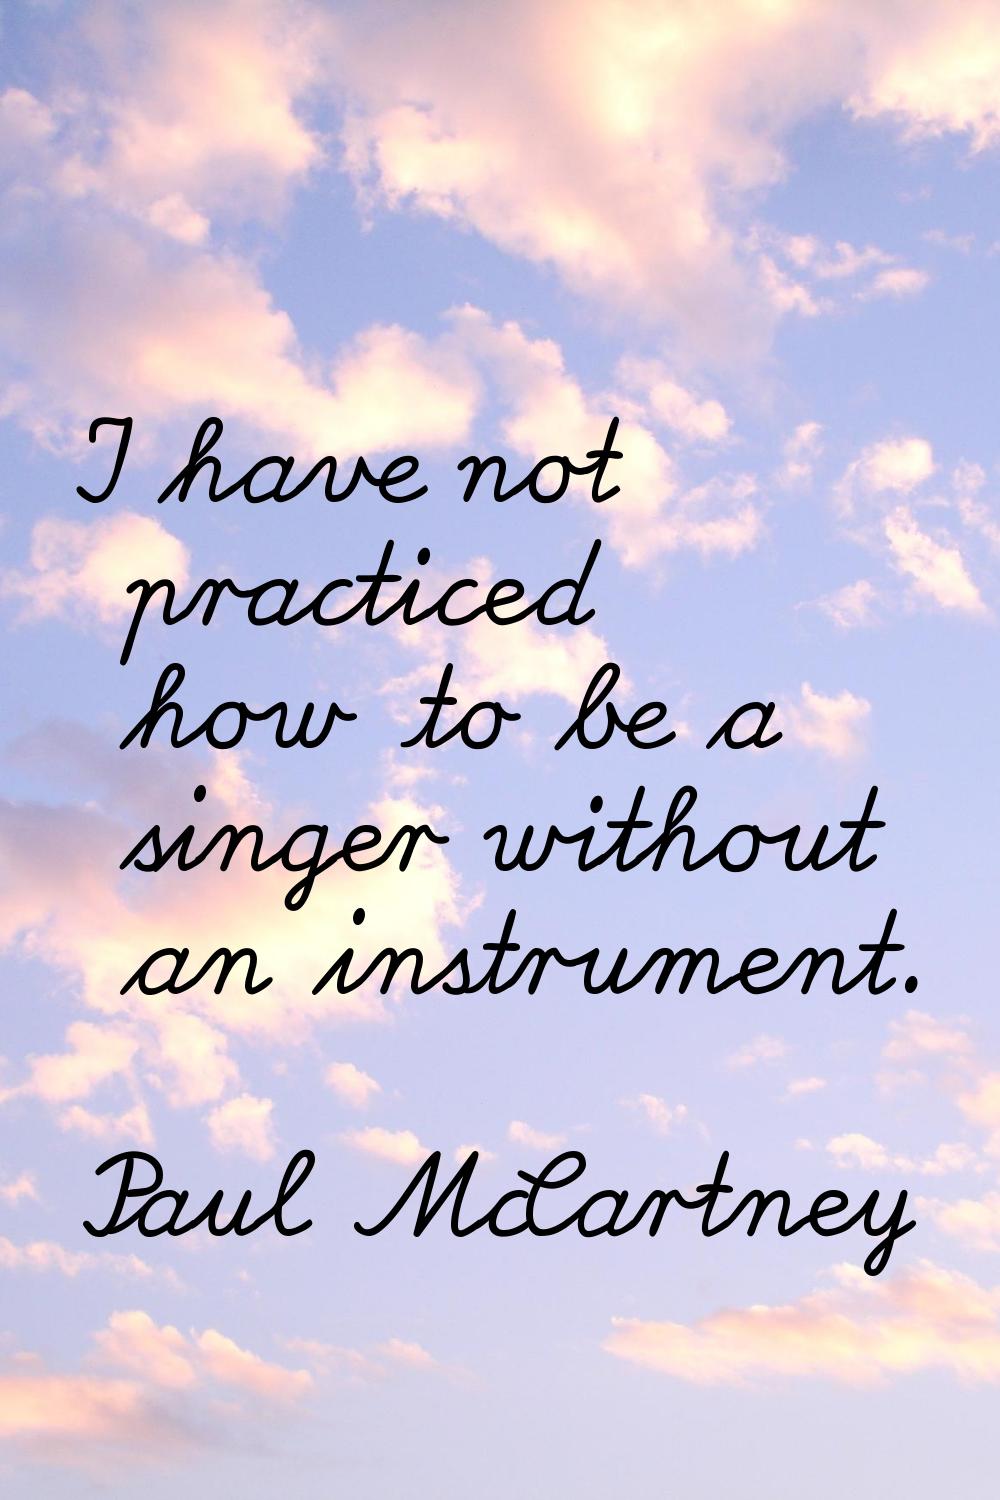 I have not practiced how to be a singer without an instrument.